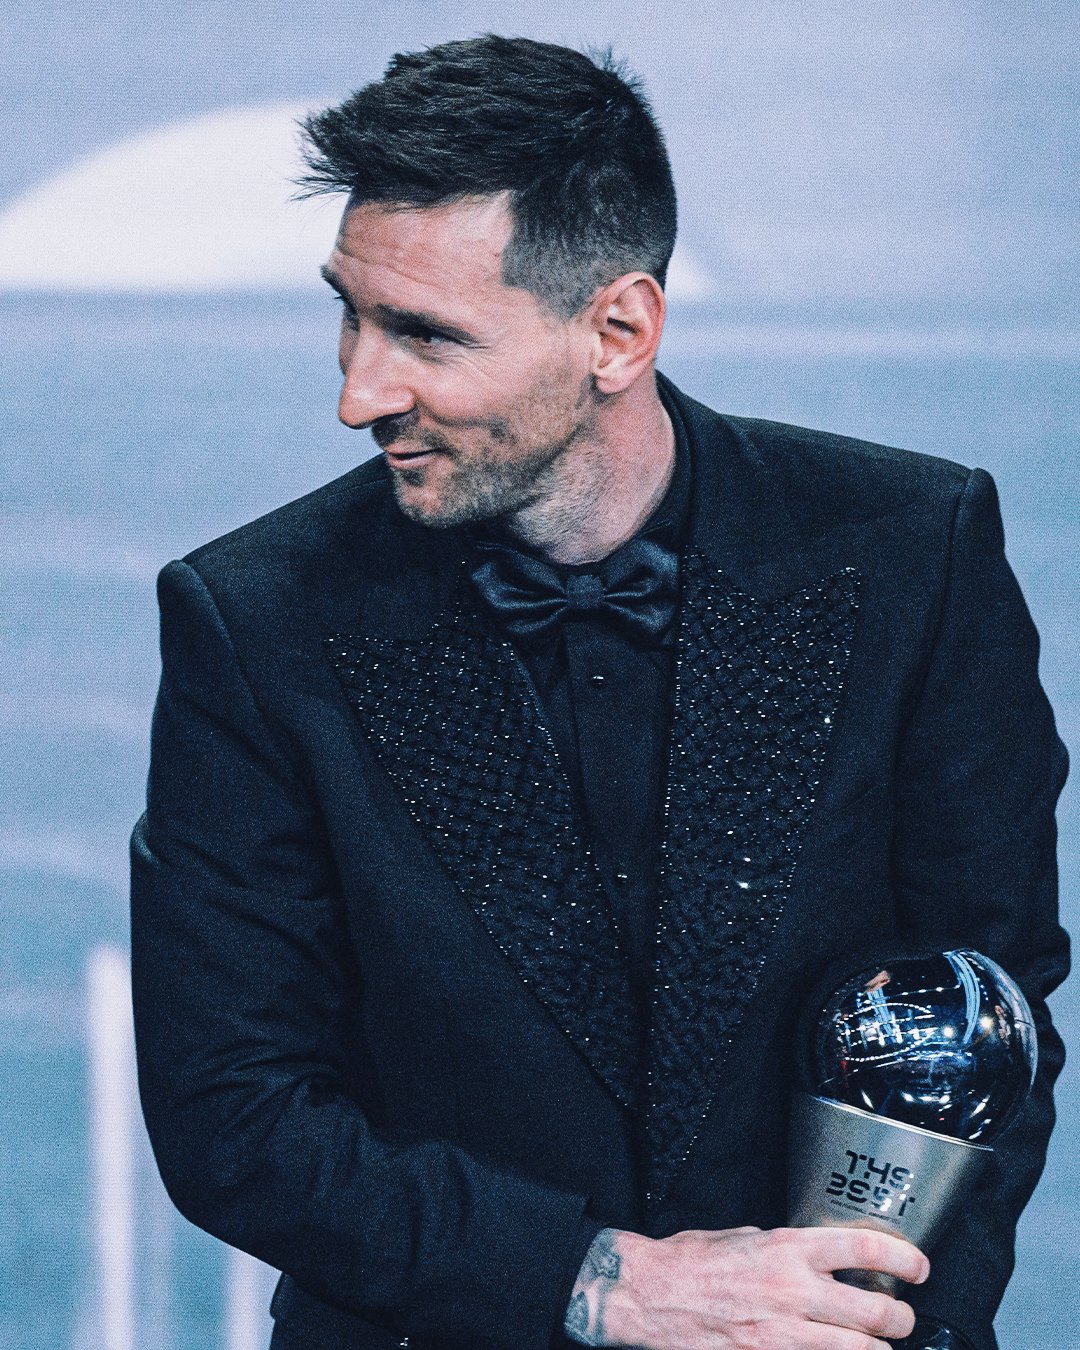 Fifa Best Awards: Lionel Messi wins best male player, Pep Guardiola named best male coach